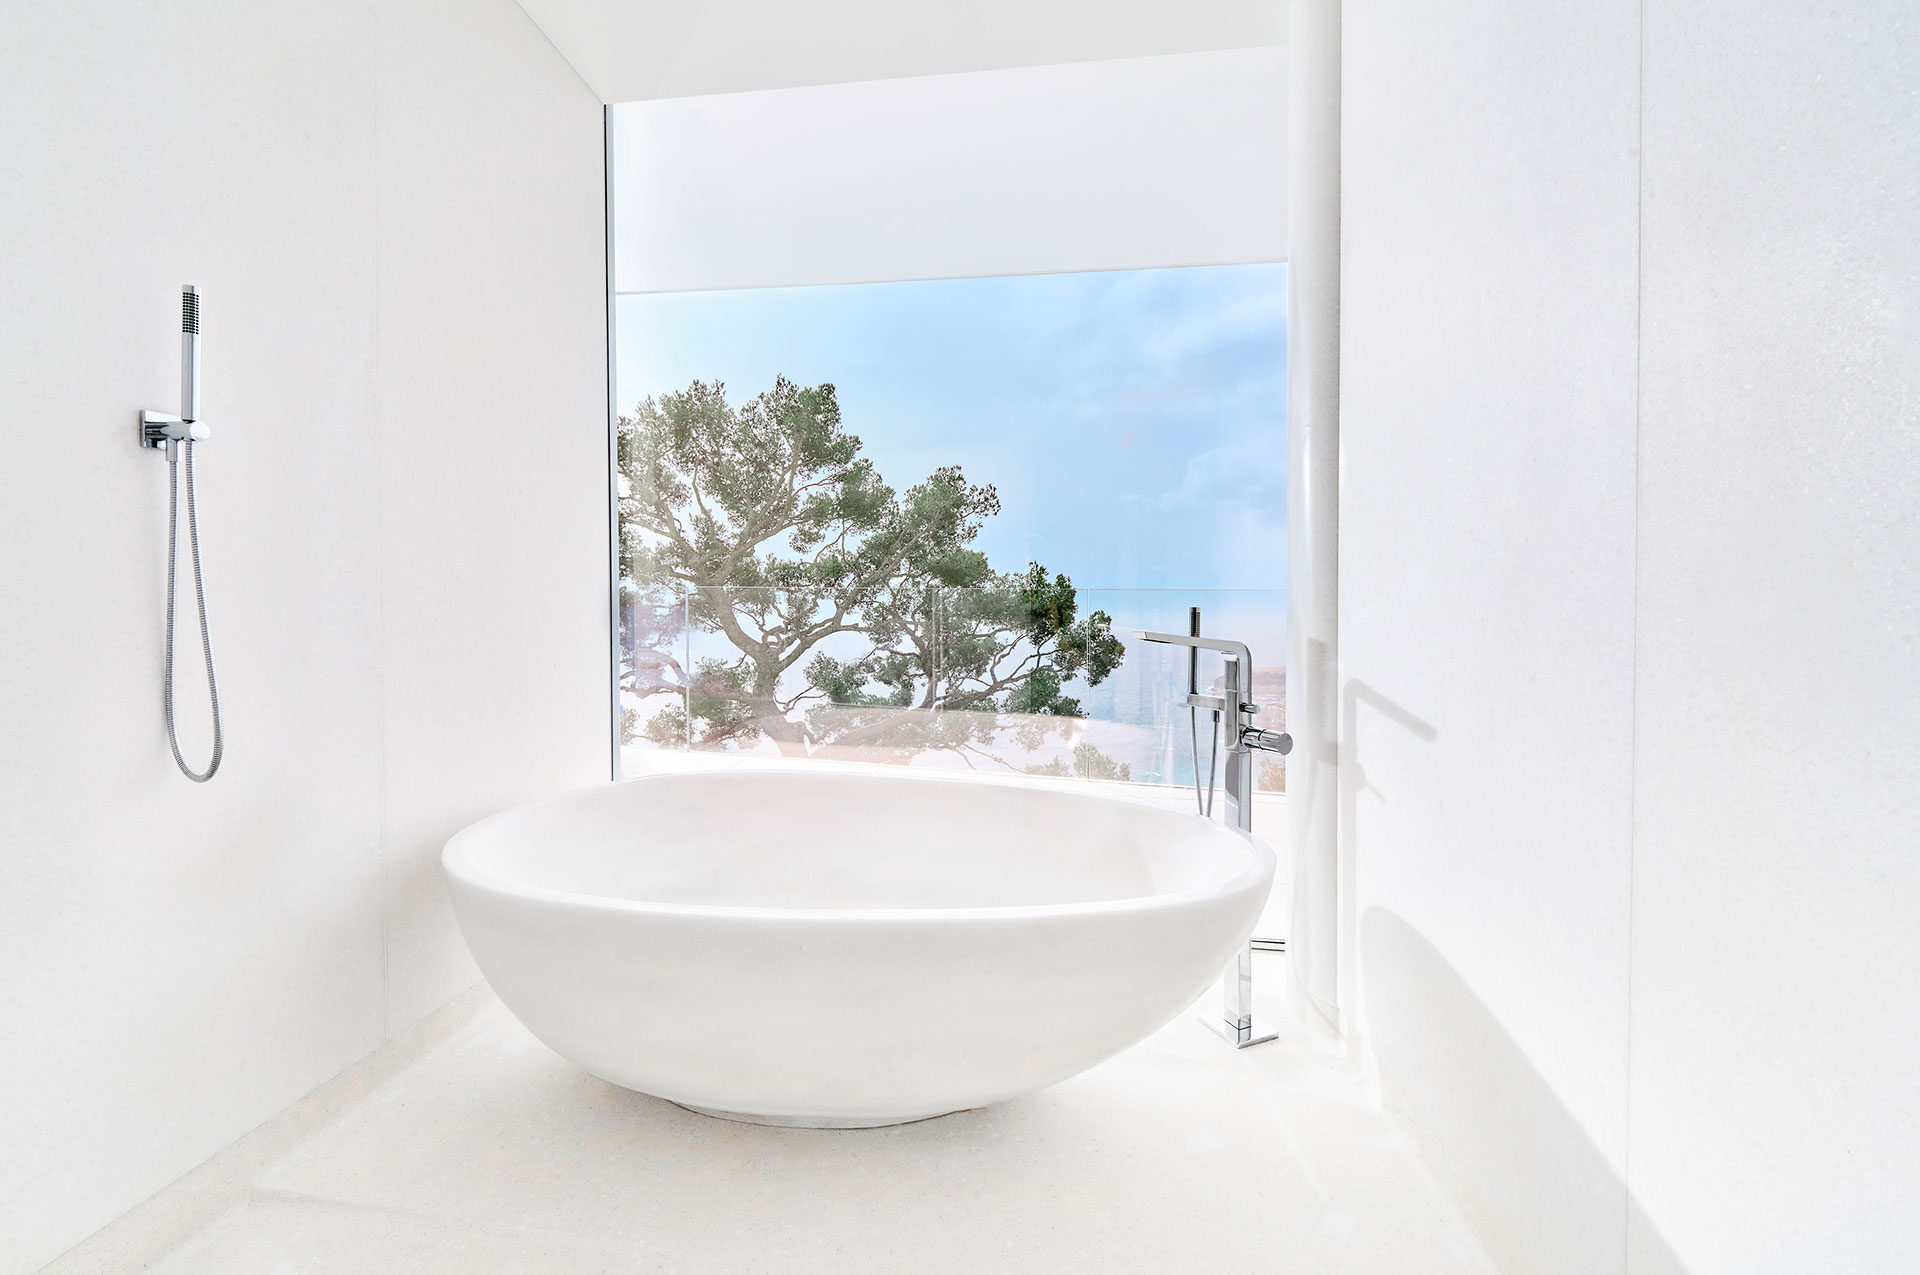 The large curved bathtub in the Sea View Suite overlooks the large tree in the hotel garden and the brilliant blue skies